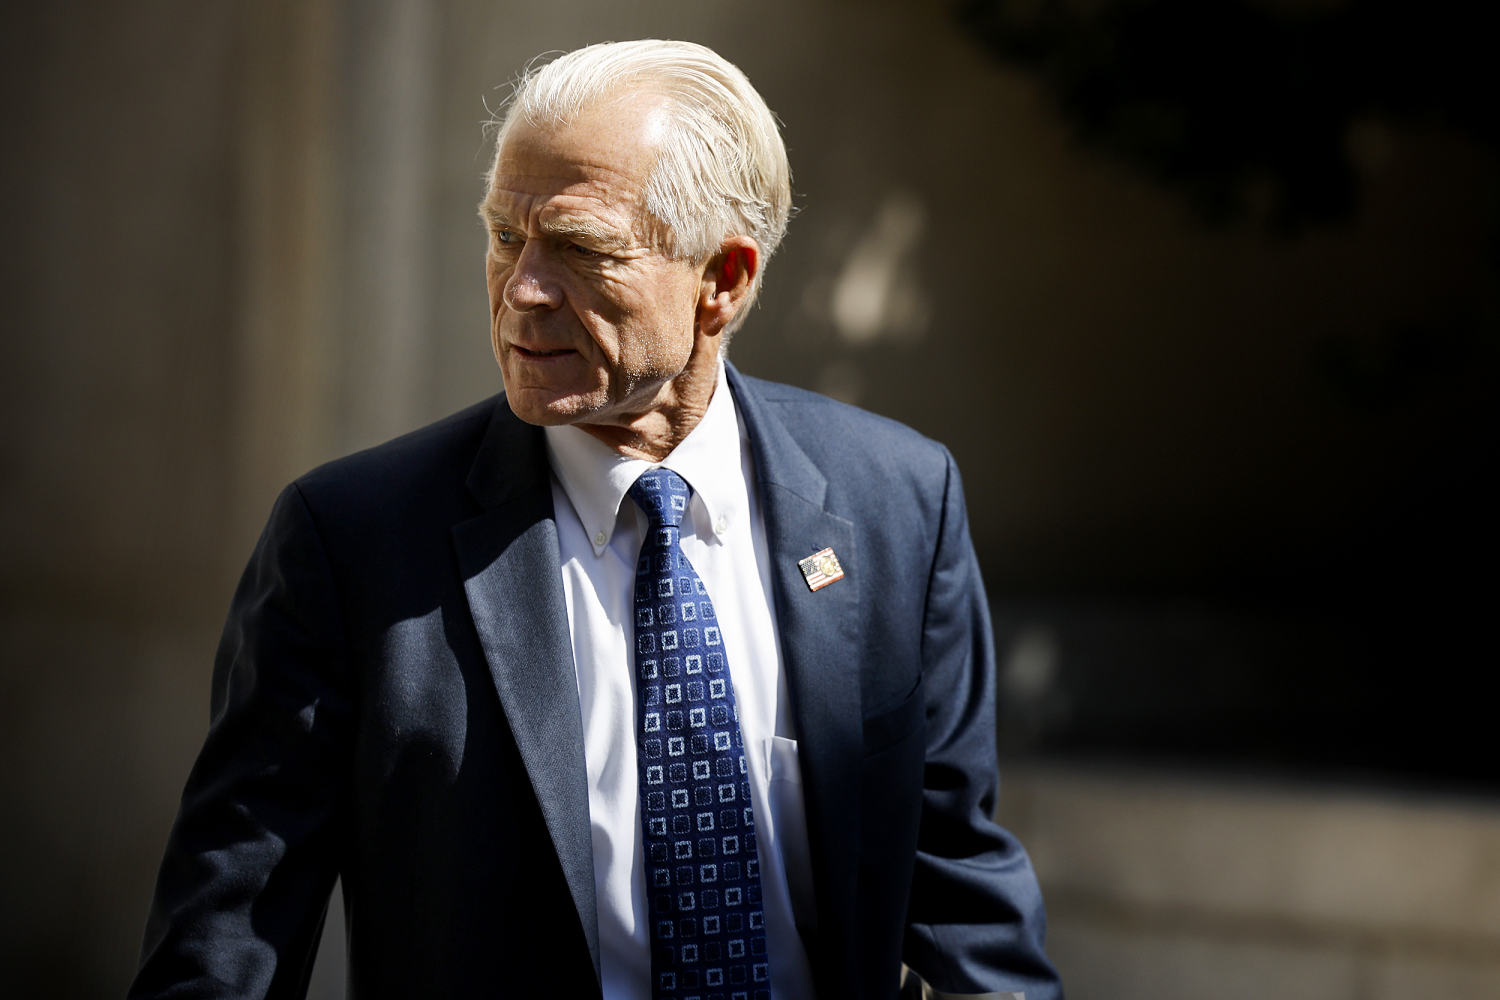 Trump adviser Peter Navarro asks Supreme Court to keep him out of prison